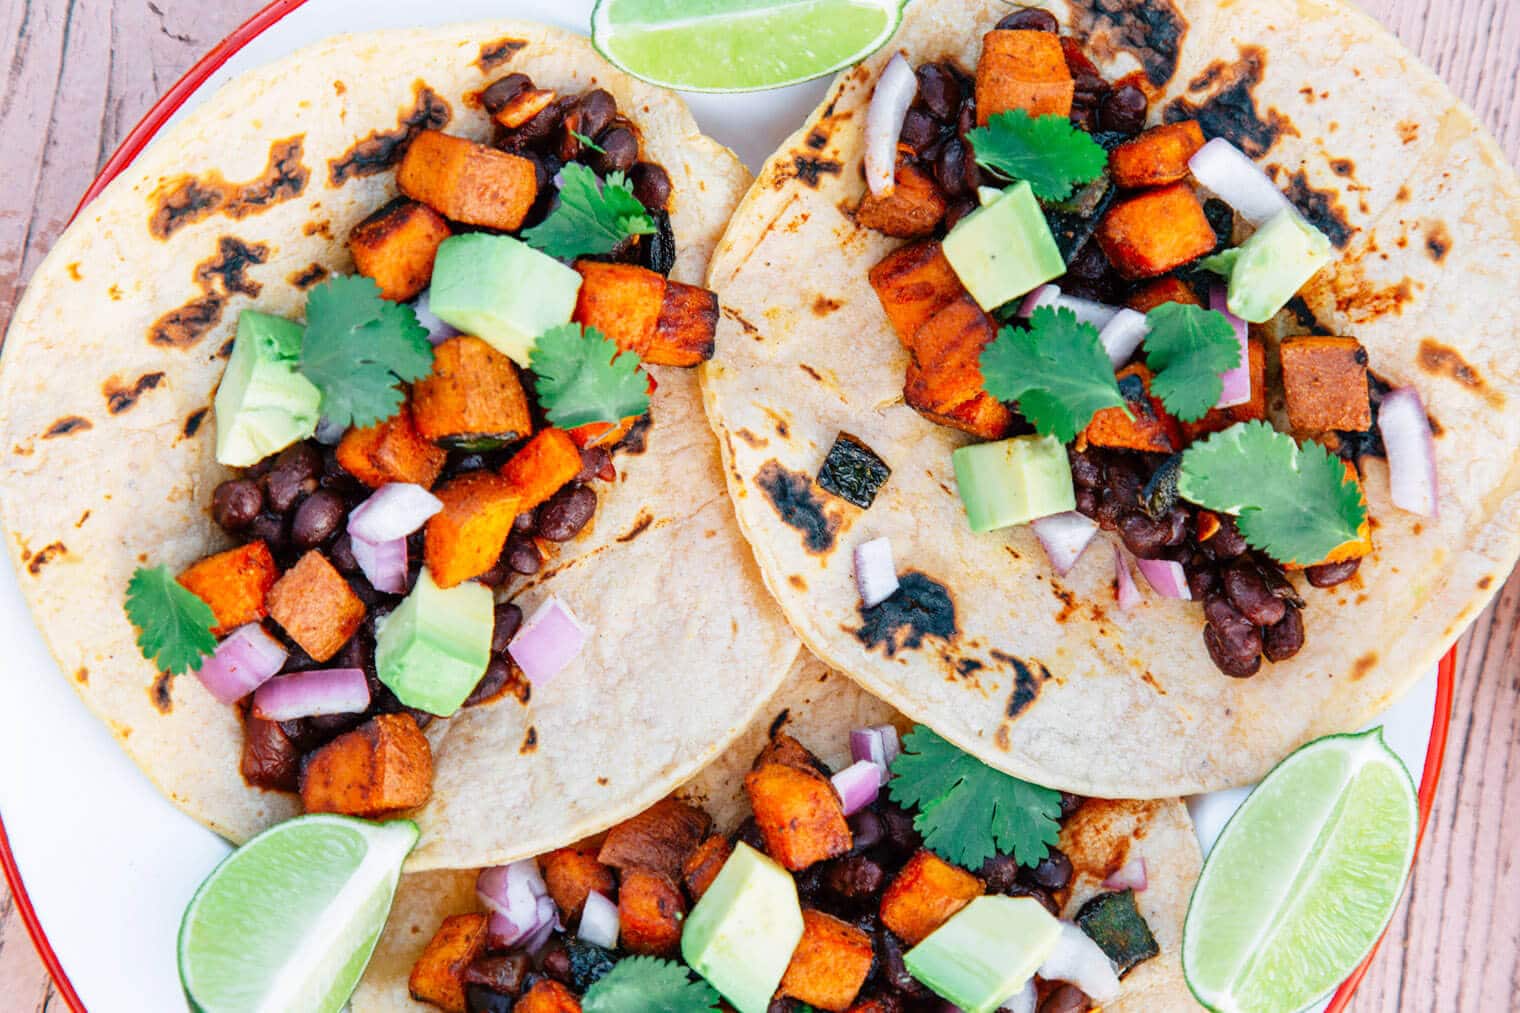 Tacos filled with sweet potatoes and black beans on a red and white plate